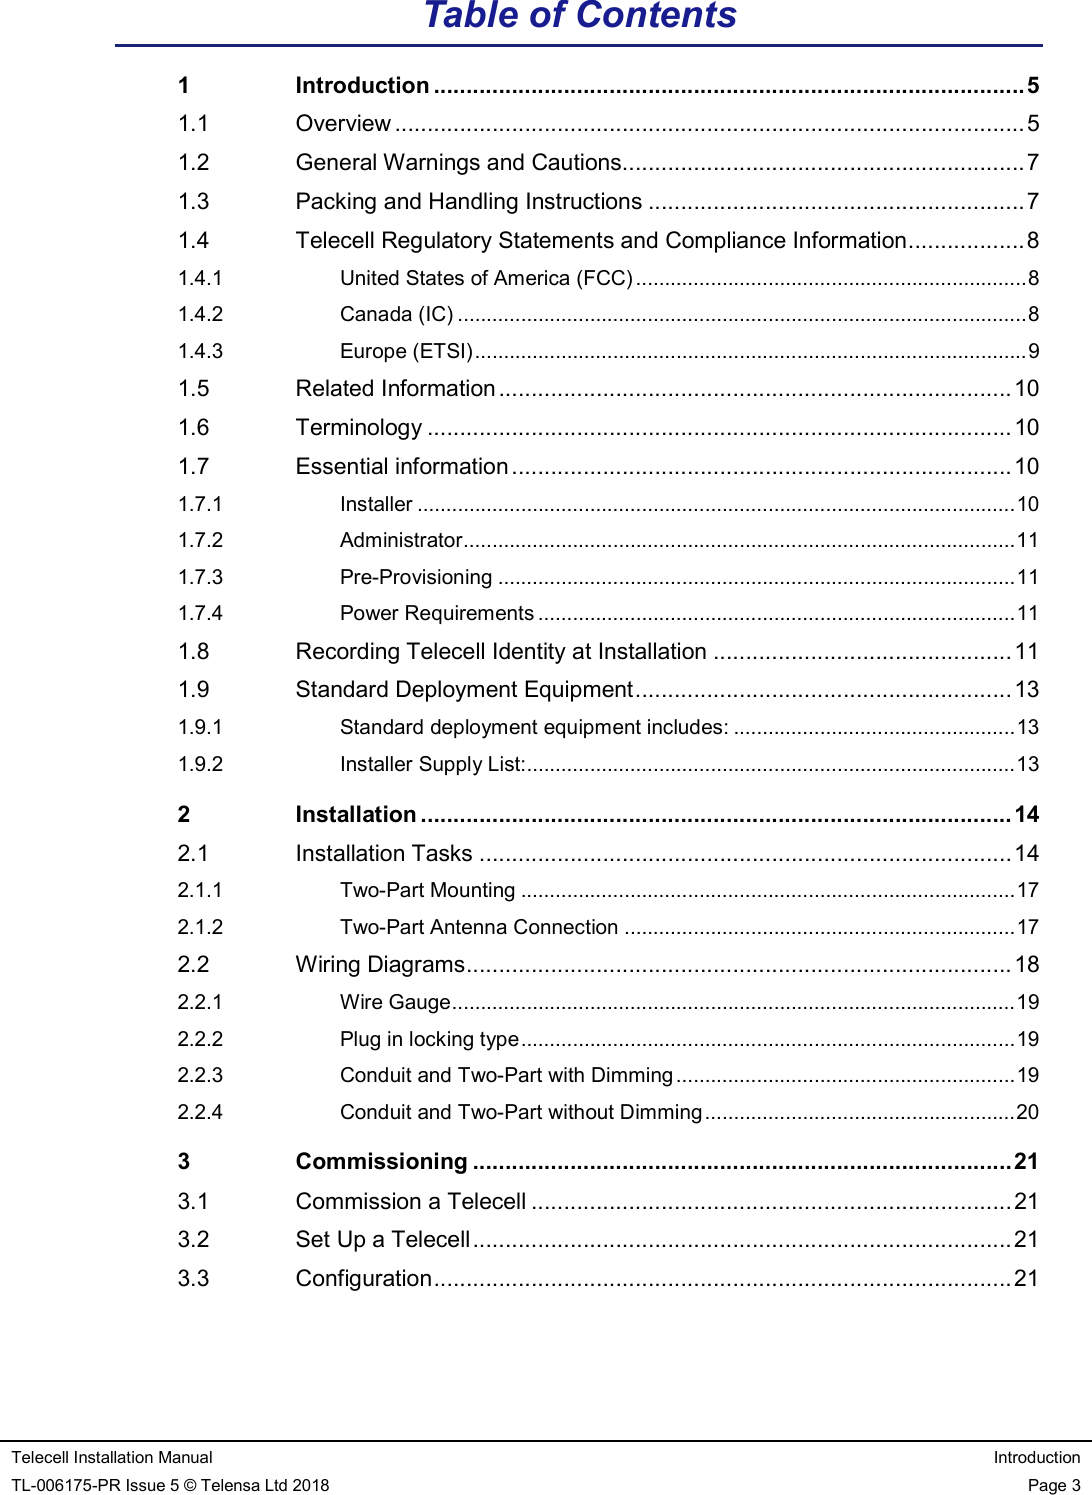    Telecell Installation Manual  Introduction TL-006175-PR Issue 5 © Telensa Ltd 2018  Page 3  Table of Contents 1 Introduction ........................................................................................... 5 1.1 Overview ................................................................................................. 5 1.2 General Warnings and Cautions.............................................................. 7 1.3 Packing and Handling Instructions .......................................................... 7 1.4 Telecell Regulatory Statements and Compliance Information .................. 8 1.4.1 United States of America (FCC) .................................................................... 8 1.4.2 Canada (IC) ................................................................................................... 8 1.4.3 Europe (ETSI) ................................................................................................ 9 1.5 Related Information ............................................................................... 10 1.6 Terminology .......................................................................................... 10 1.7 Essential information ............................................................................. 10 1.7.1 Installer ........................................................................................................ 10 1.7.2 Administrator ................................................................................................ 11 1.7.3 Pre-Provisioning .......................................................................................... 11 1.7.4 Power Requirements ................................................................................... 11 1.8 Recording Telecell Identity at Installation .............................................. 11 1.9 Standard Deployment Equipment .......................................................... 13 1.9.1 Standard deployment equipment includes: ................................................. 13 1.9.2 Installer Supply List:..................................................................................... 13 2 Installation ........................................................................................... 14 2.1 Installation Tasks .................................................................................. 14 2.1.1 Two-Part Mounting ...................................................................................... 17 2.1.2 Two-Part Antenna Connection .................................................................... 17 2.2 Wiring Diagrams .................................................................................... 18 2.2.1 Wire Gauge .................................................................................................. 19 2.2.2 Plug in locking type ...................................................................................... 19 2.2.3 Conduit and Two-Part with Dimming ........................................................... 19 2.2.4 Conduit and Two-Part without Dimming ...................................................... 20 3 Commissioning ................................................................................... 21 3.1 Commission a Telecell .......................................................................... 21 3.2 Set Up a Telecell ................................................................................... 21 3.3 Configuration ......................................................................................... 21 